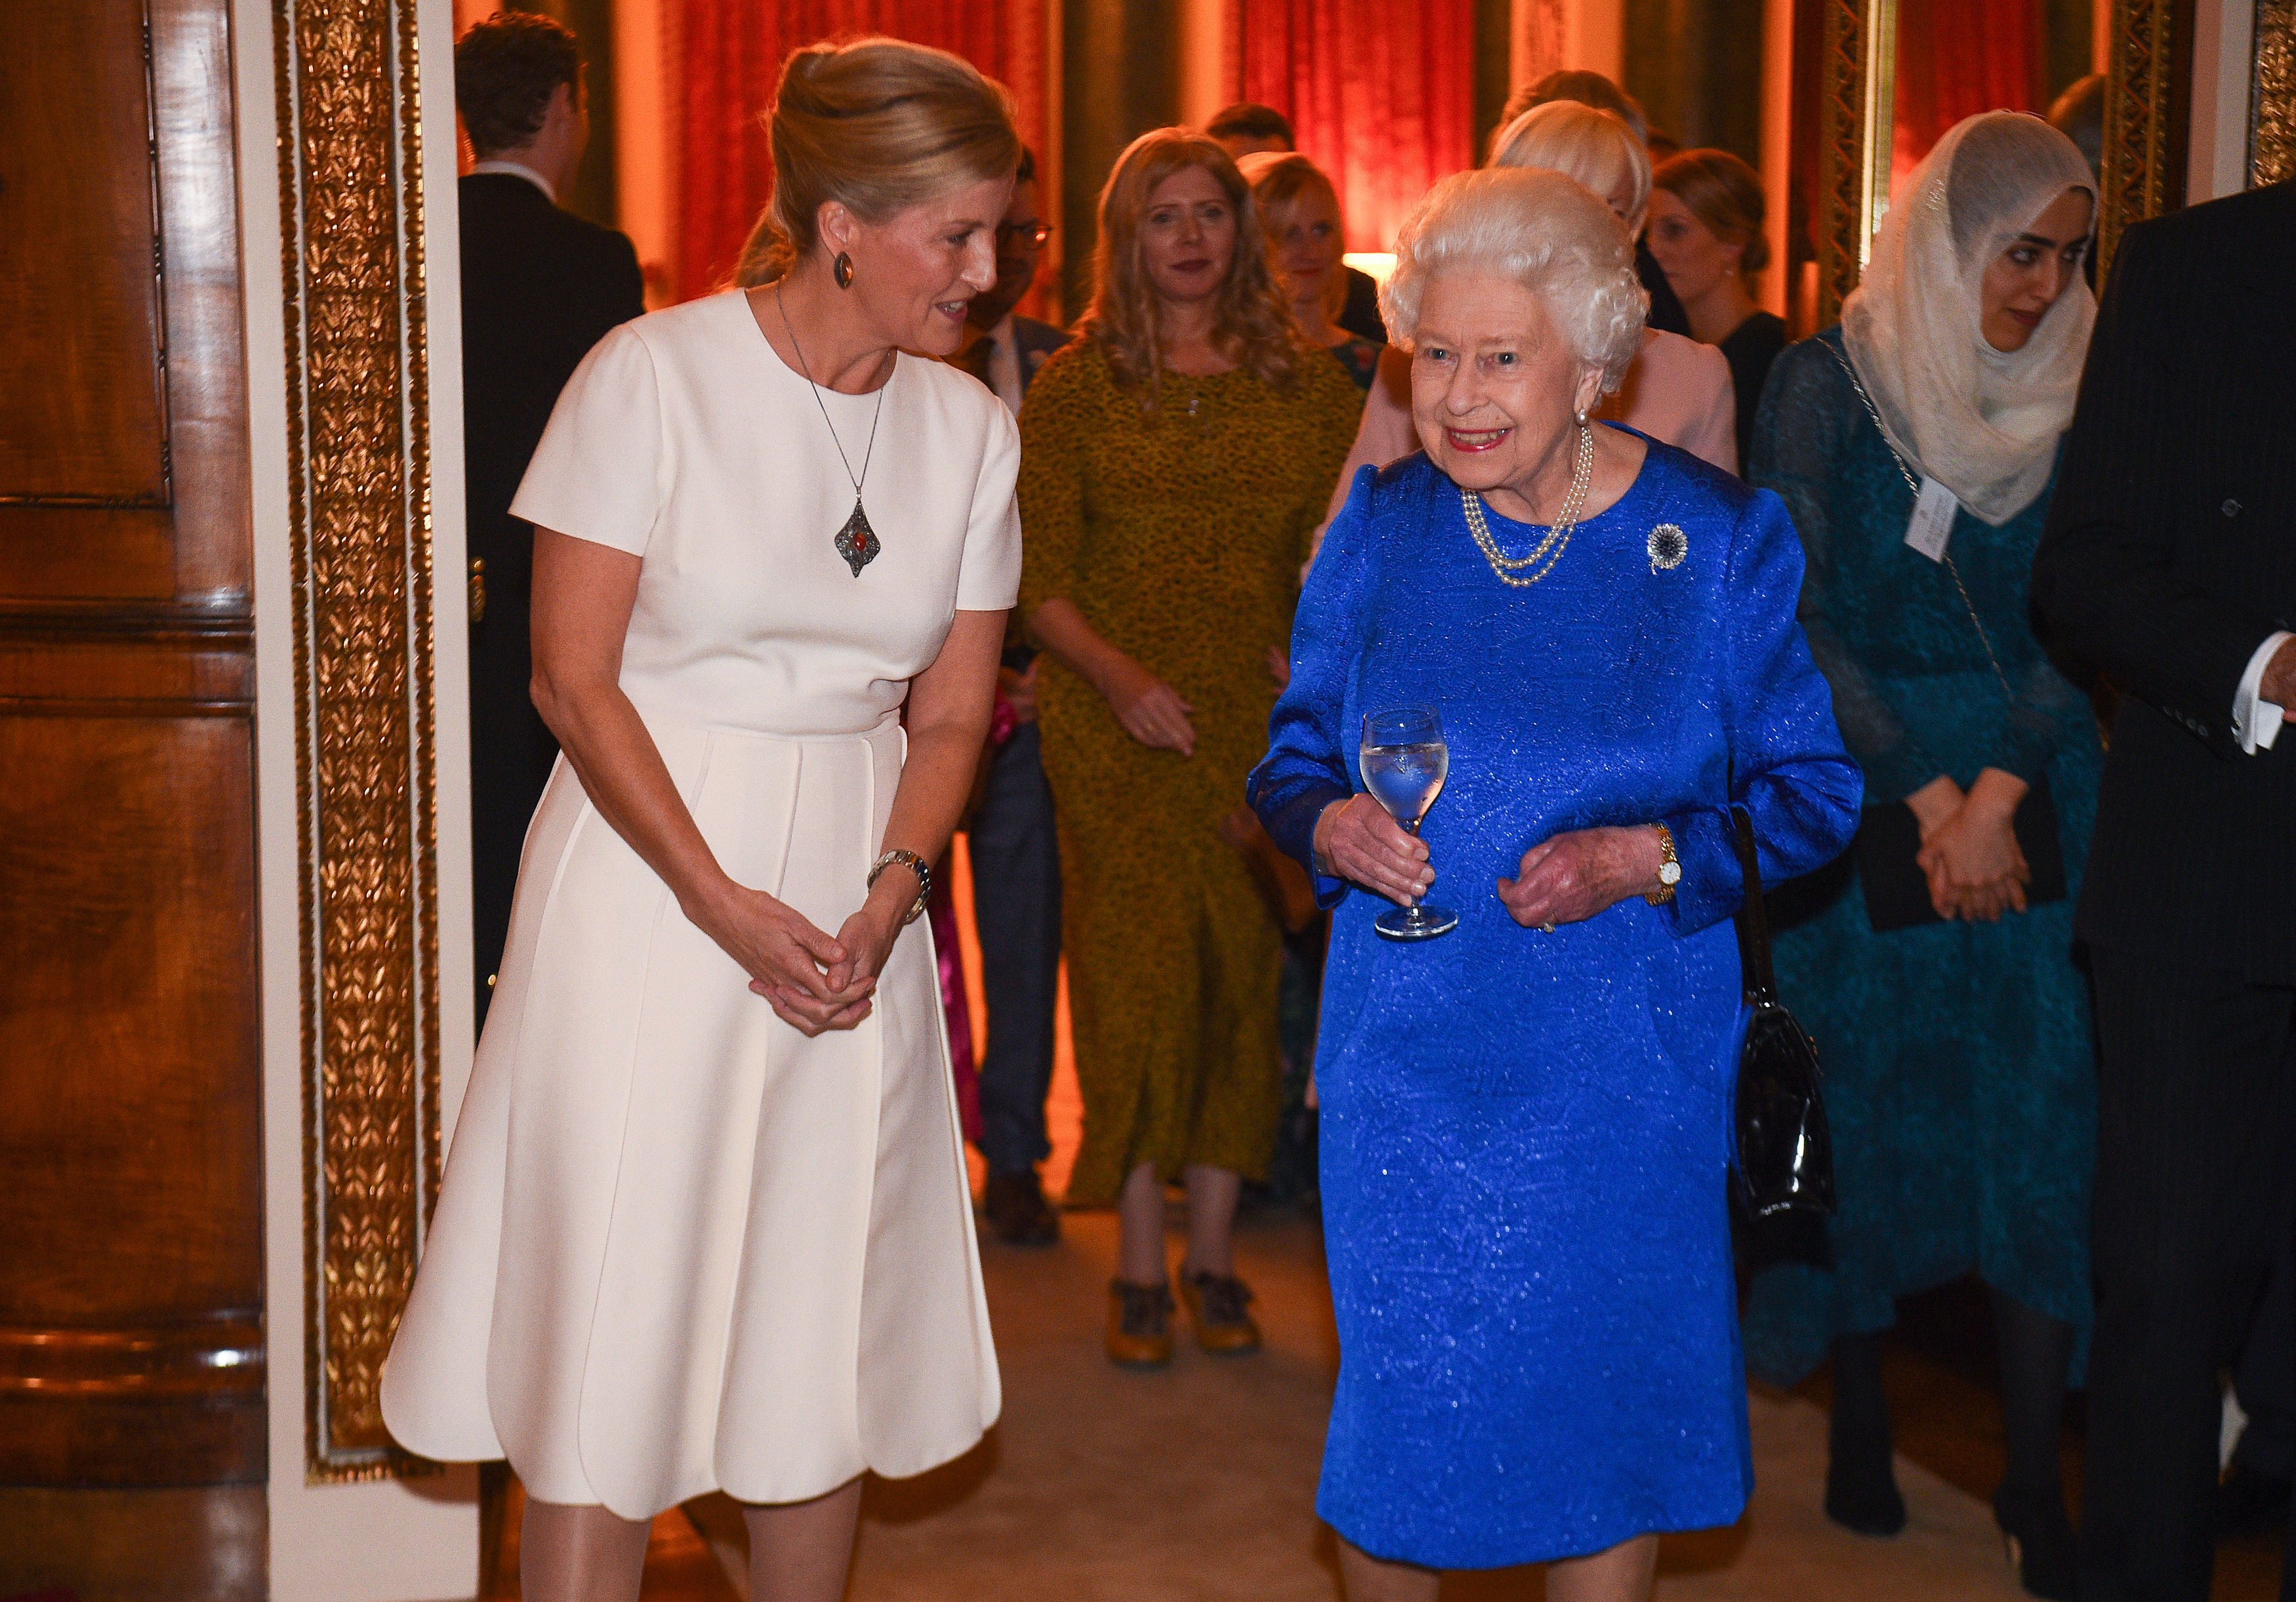 Queen Elizabeth II and Sophie, Countess of Wessex, attend a reception at Buckingham Palace in London on October 29, 2019, to celebrate the work of The Queen Elizabeth Diamond Jubilee Trust. | Source: Getty Images